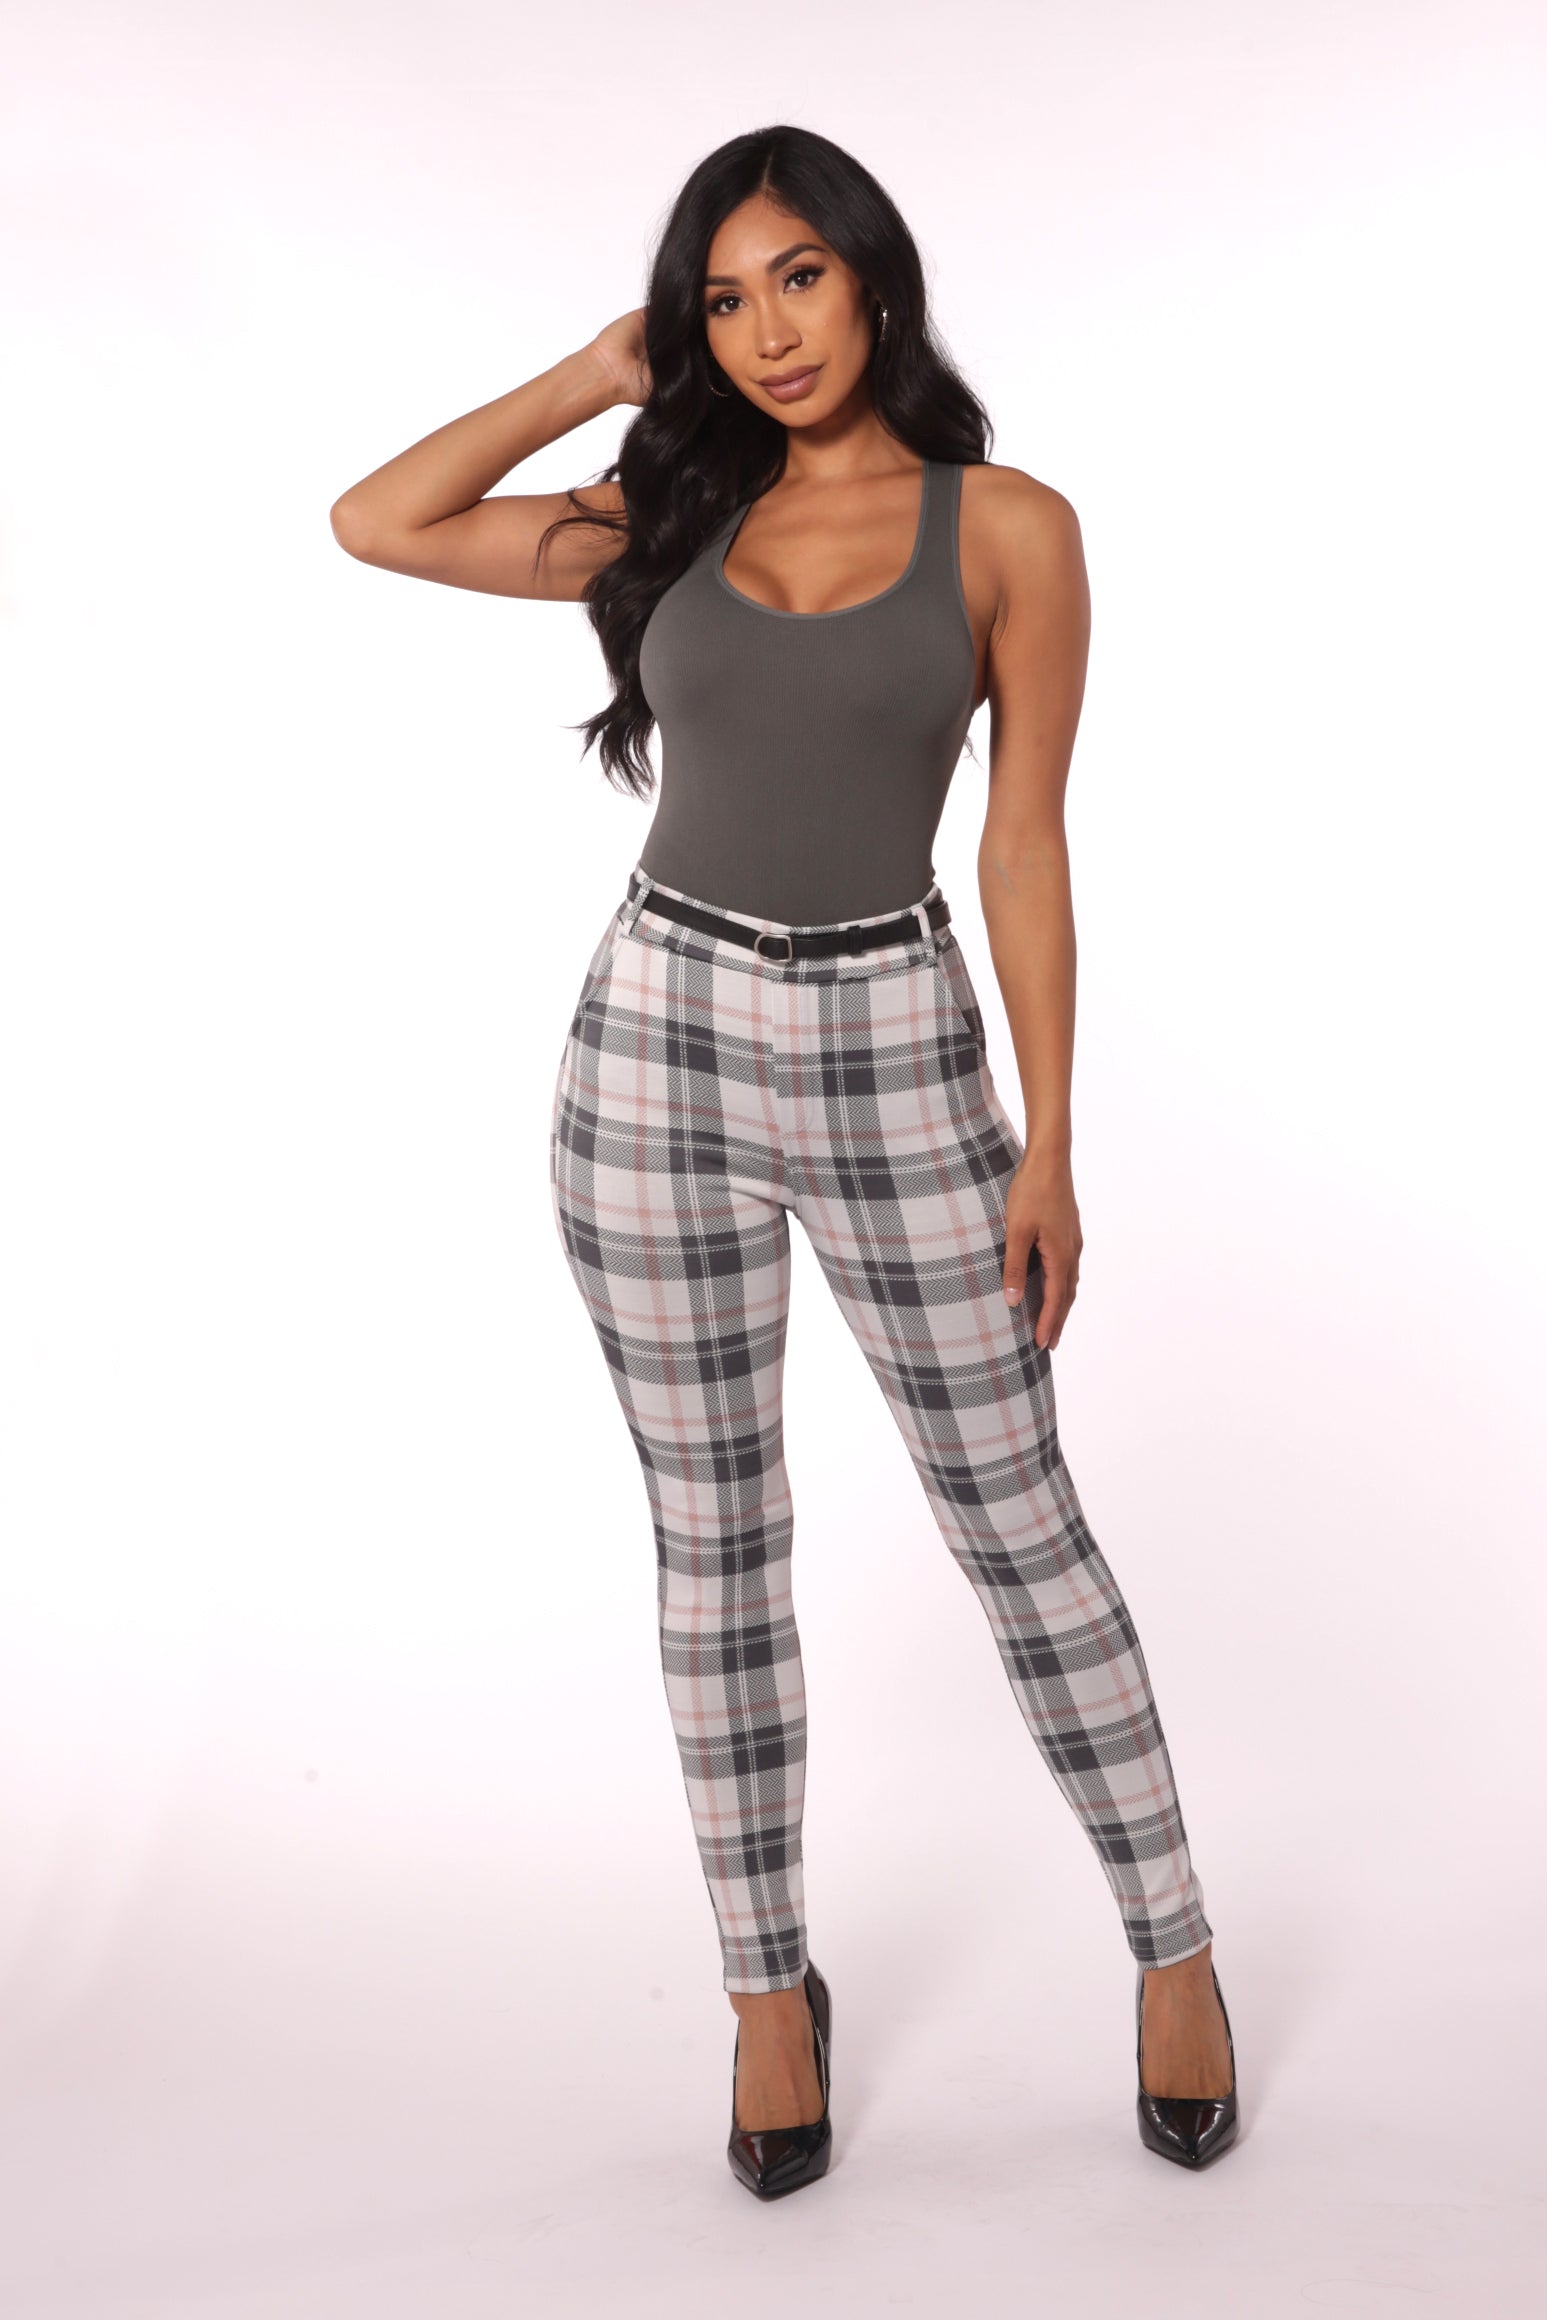 Wholesale Womens Sculpting Treggings With Faux Leather Belt - White, Sage Plaid - S&G Apparel